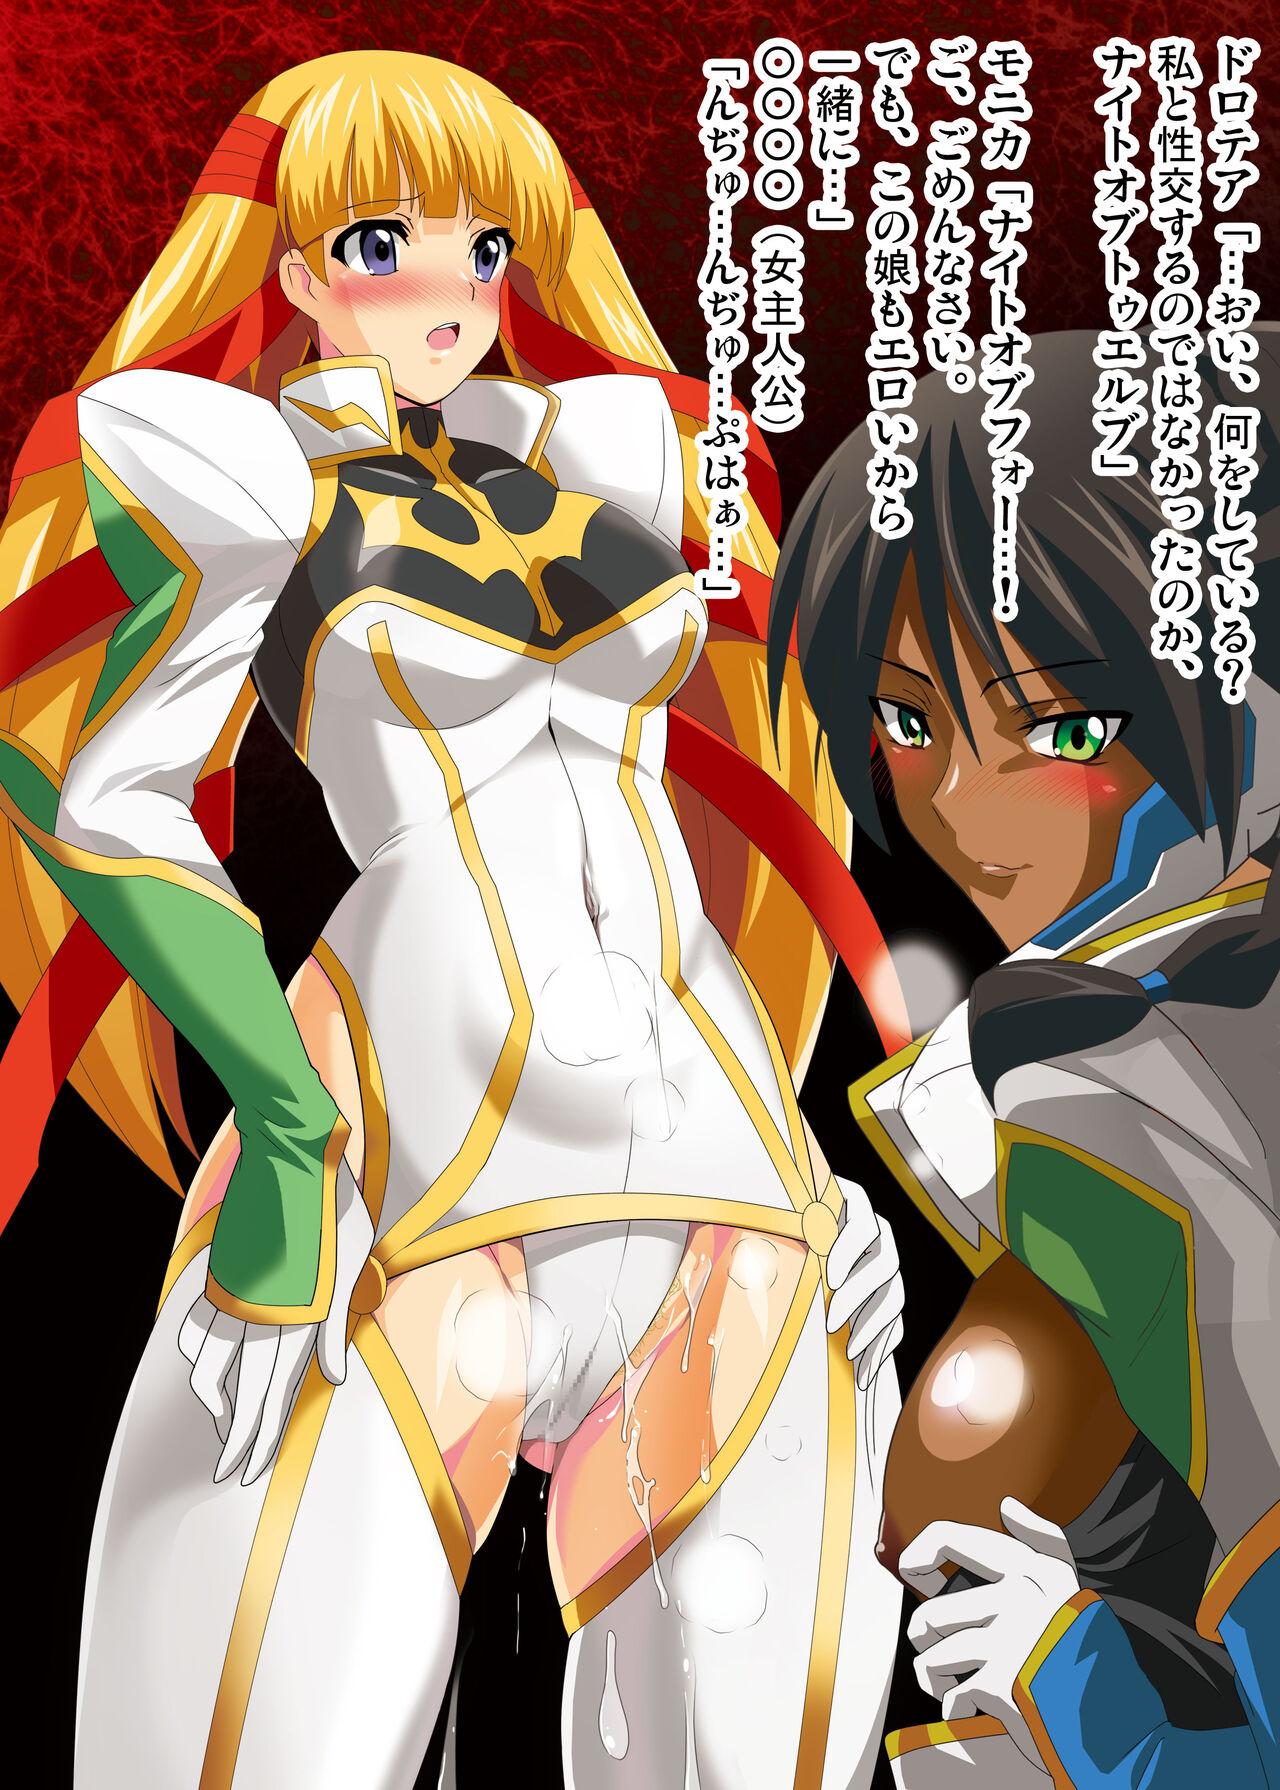 [Lezmoe! (Oyu no Kaori)]   [Brainwashing] Geass heroines completely corrupted by Empress Marianne [Evil fall] ~Knights, princesses, soldiers, and witches fall! (CODE GEASS: Lelouch of the Rebellion) 79